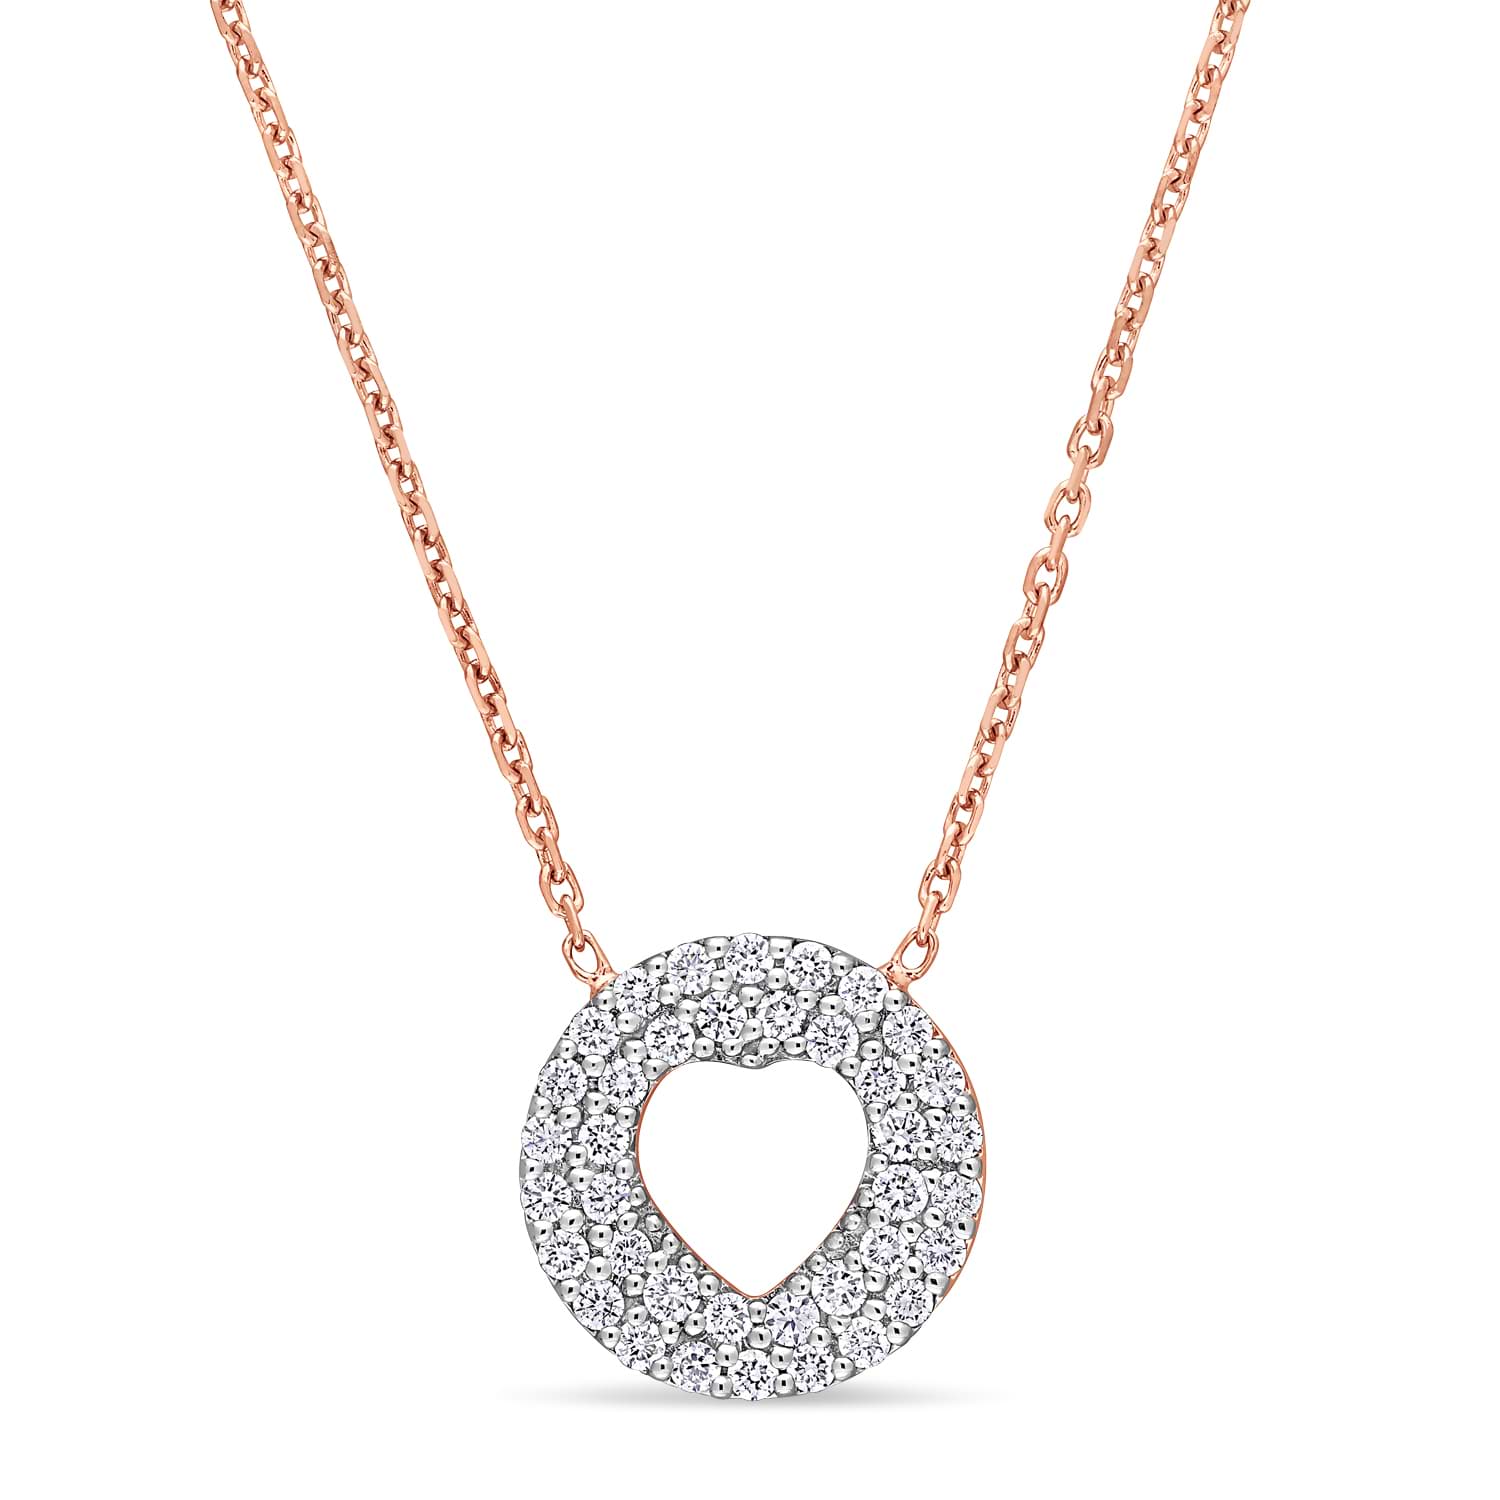 Round Diamond Inverted Heart Pendant Necklace 18k Rose Gold (0.30 ct)